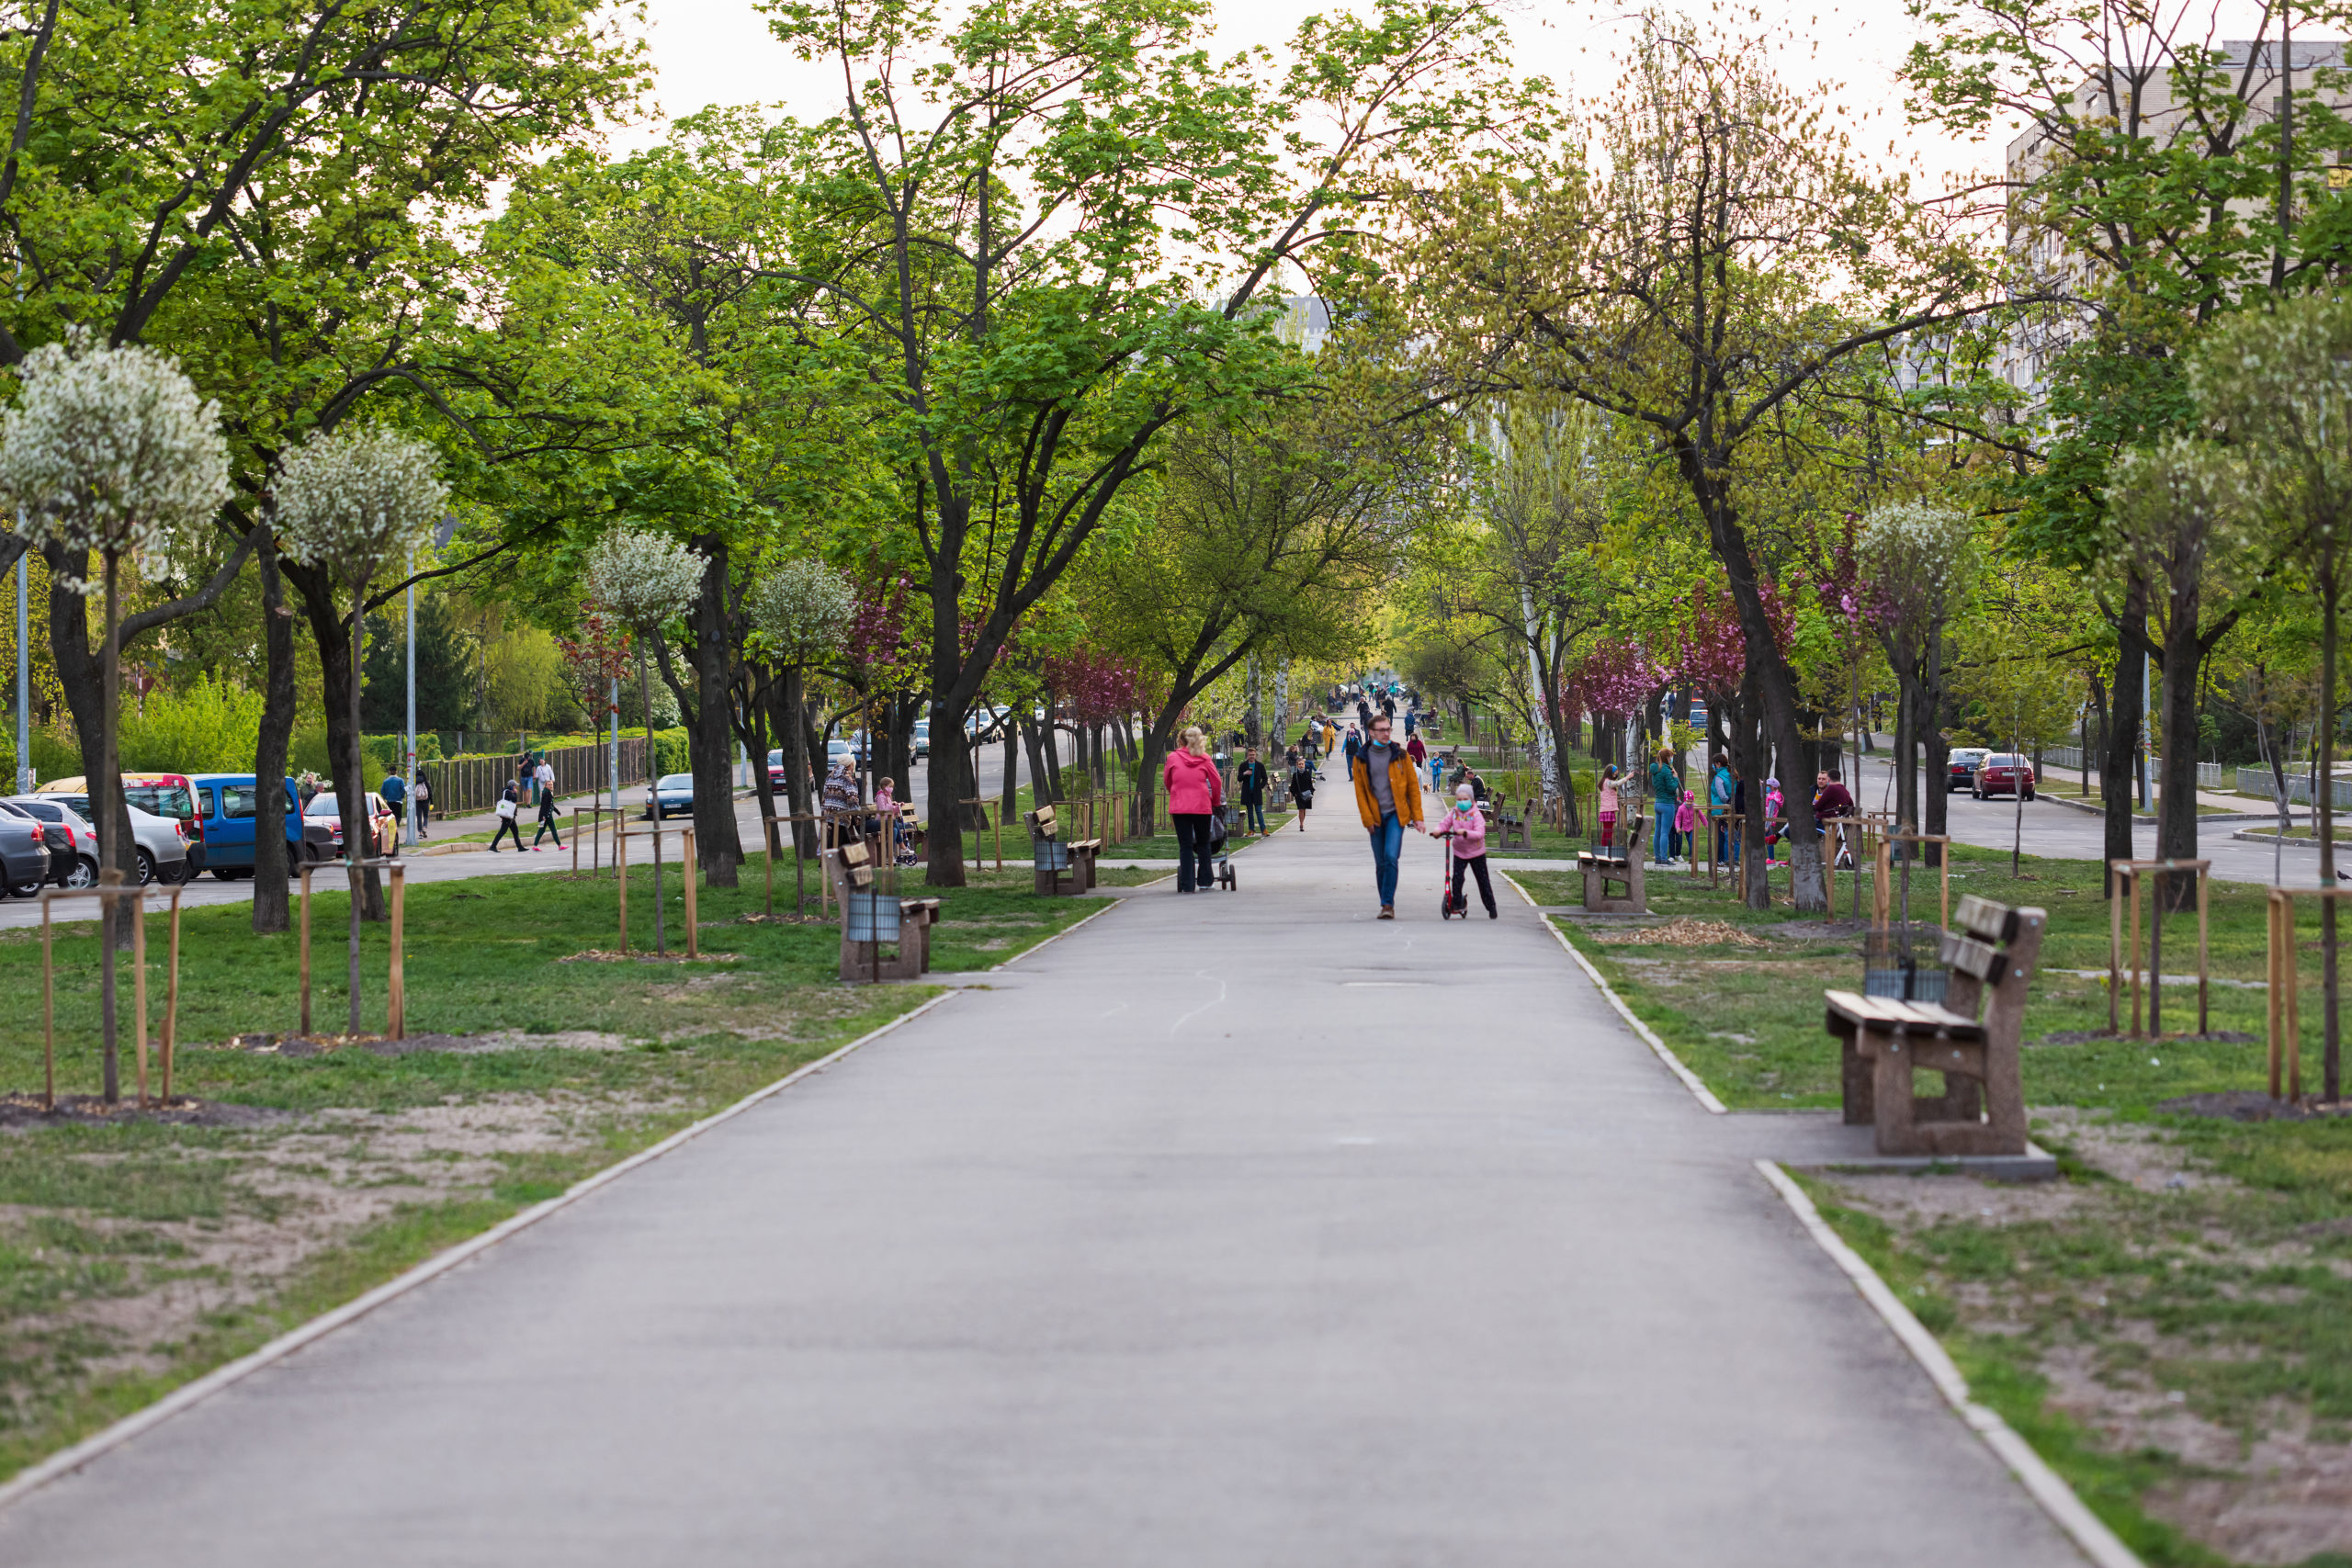 Revitalizing Communities: One Smart Park at a Time